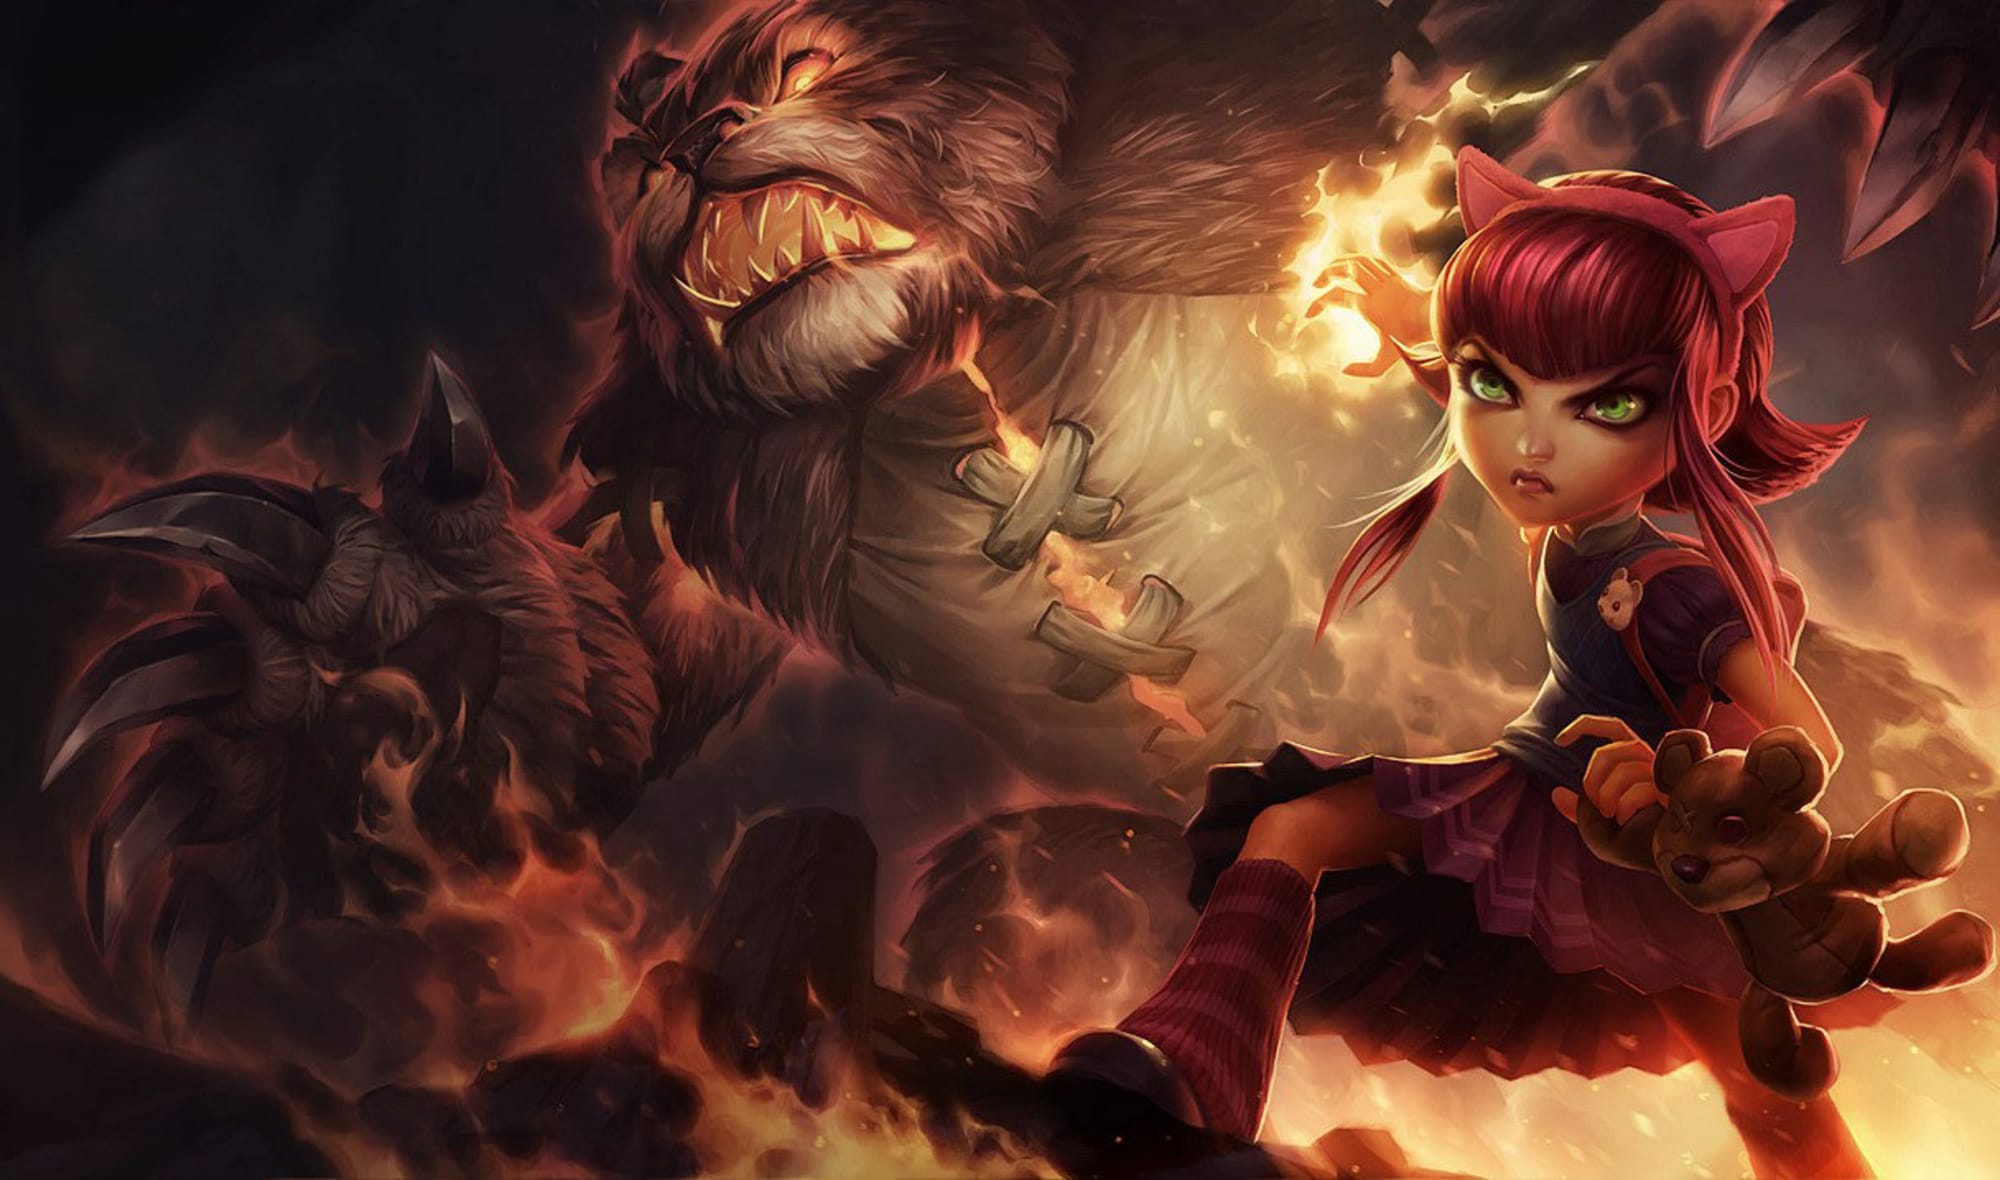 Begravelse skrive et brev Pick up blade LoL Guide: How To Play Annie (Items, Runes, Tips & Tricks)